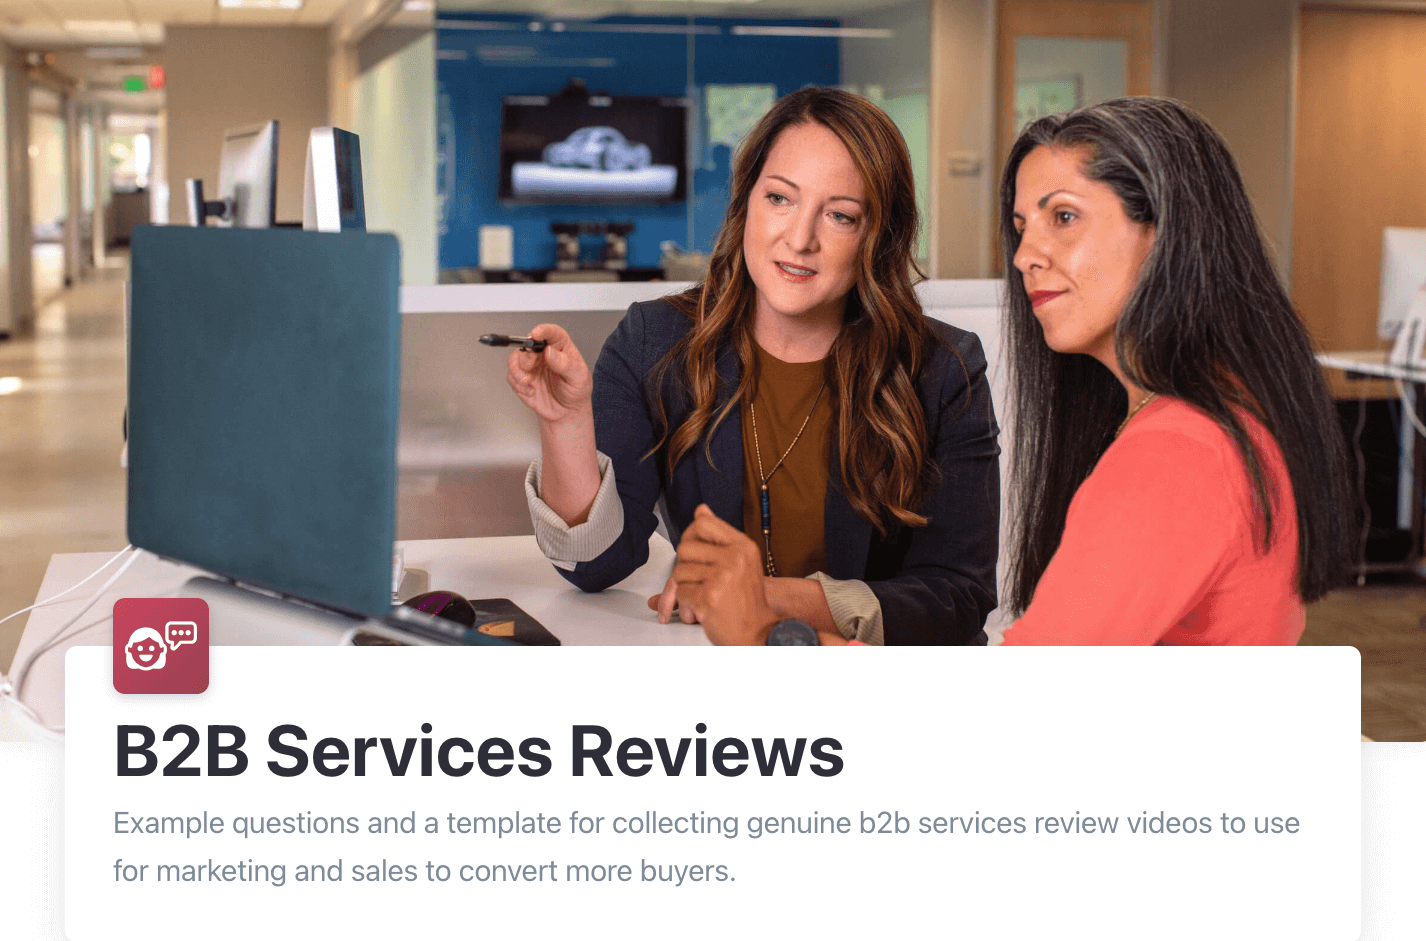 B2B Services Reviews: Example questions and a template for collecting genuine b2b services review videos to use for marketing and sales to convert more buyers.